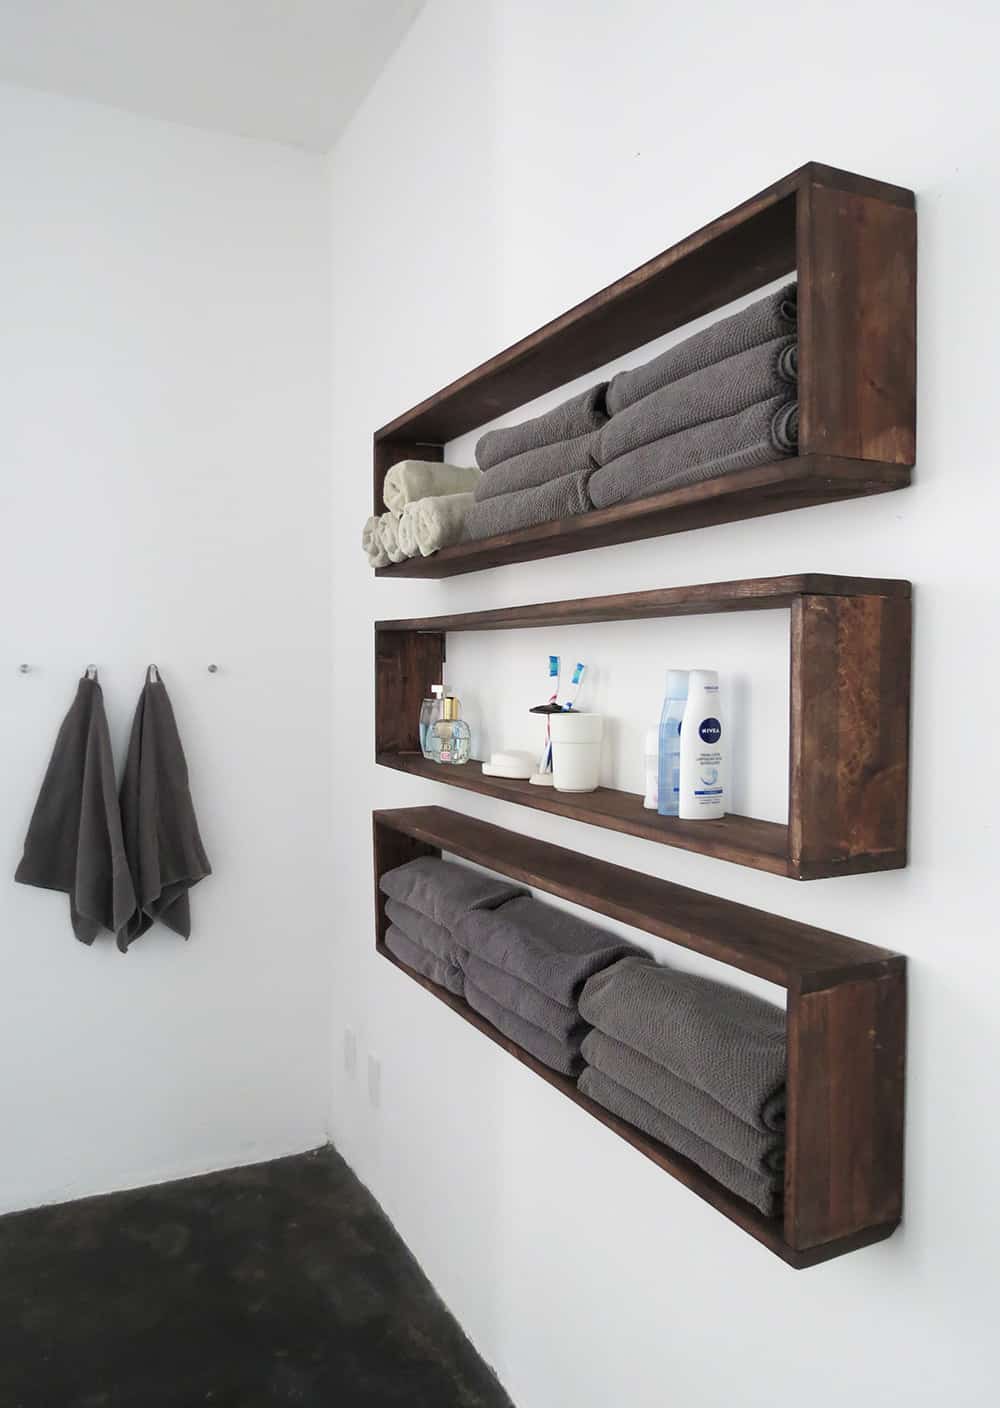 16 Clever DIY Rustic Storage & Organization Projects For Your Home